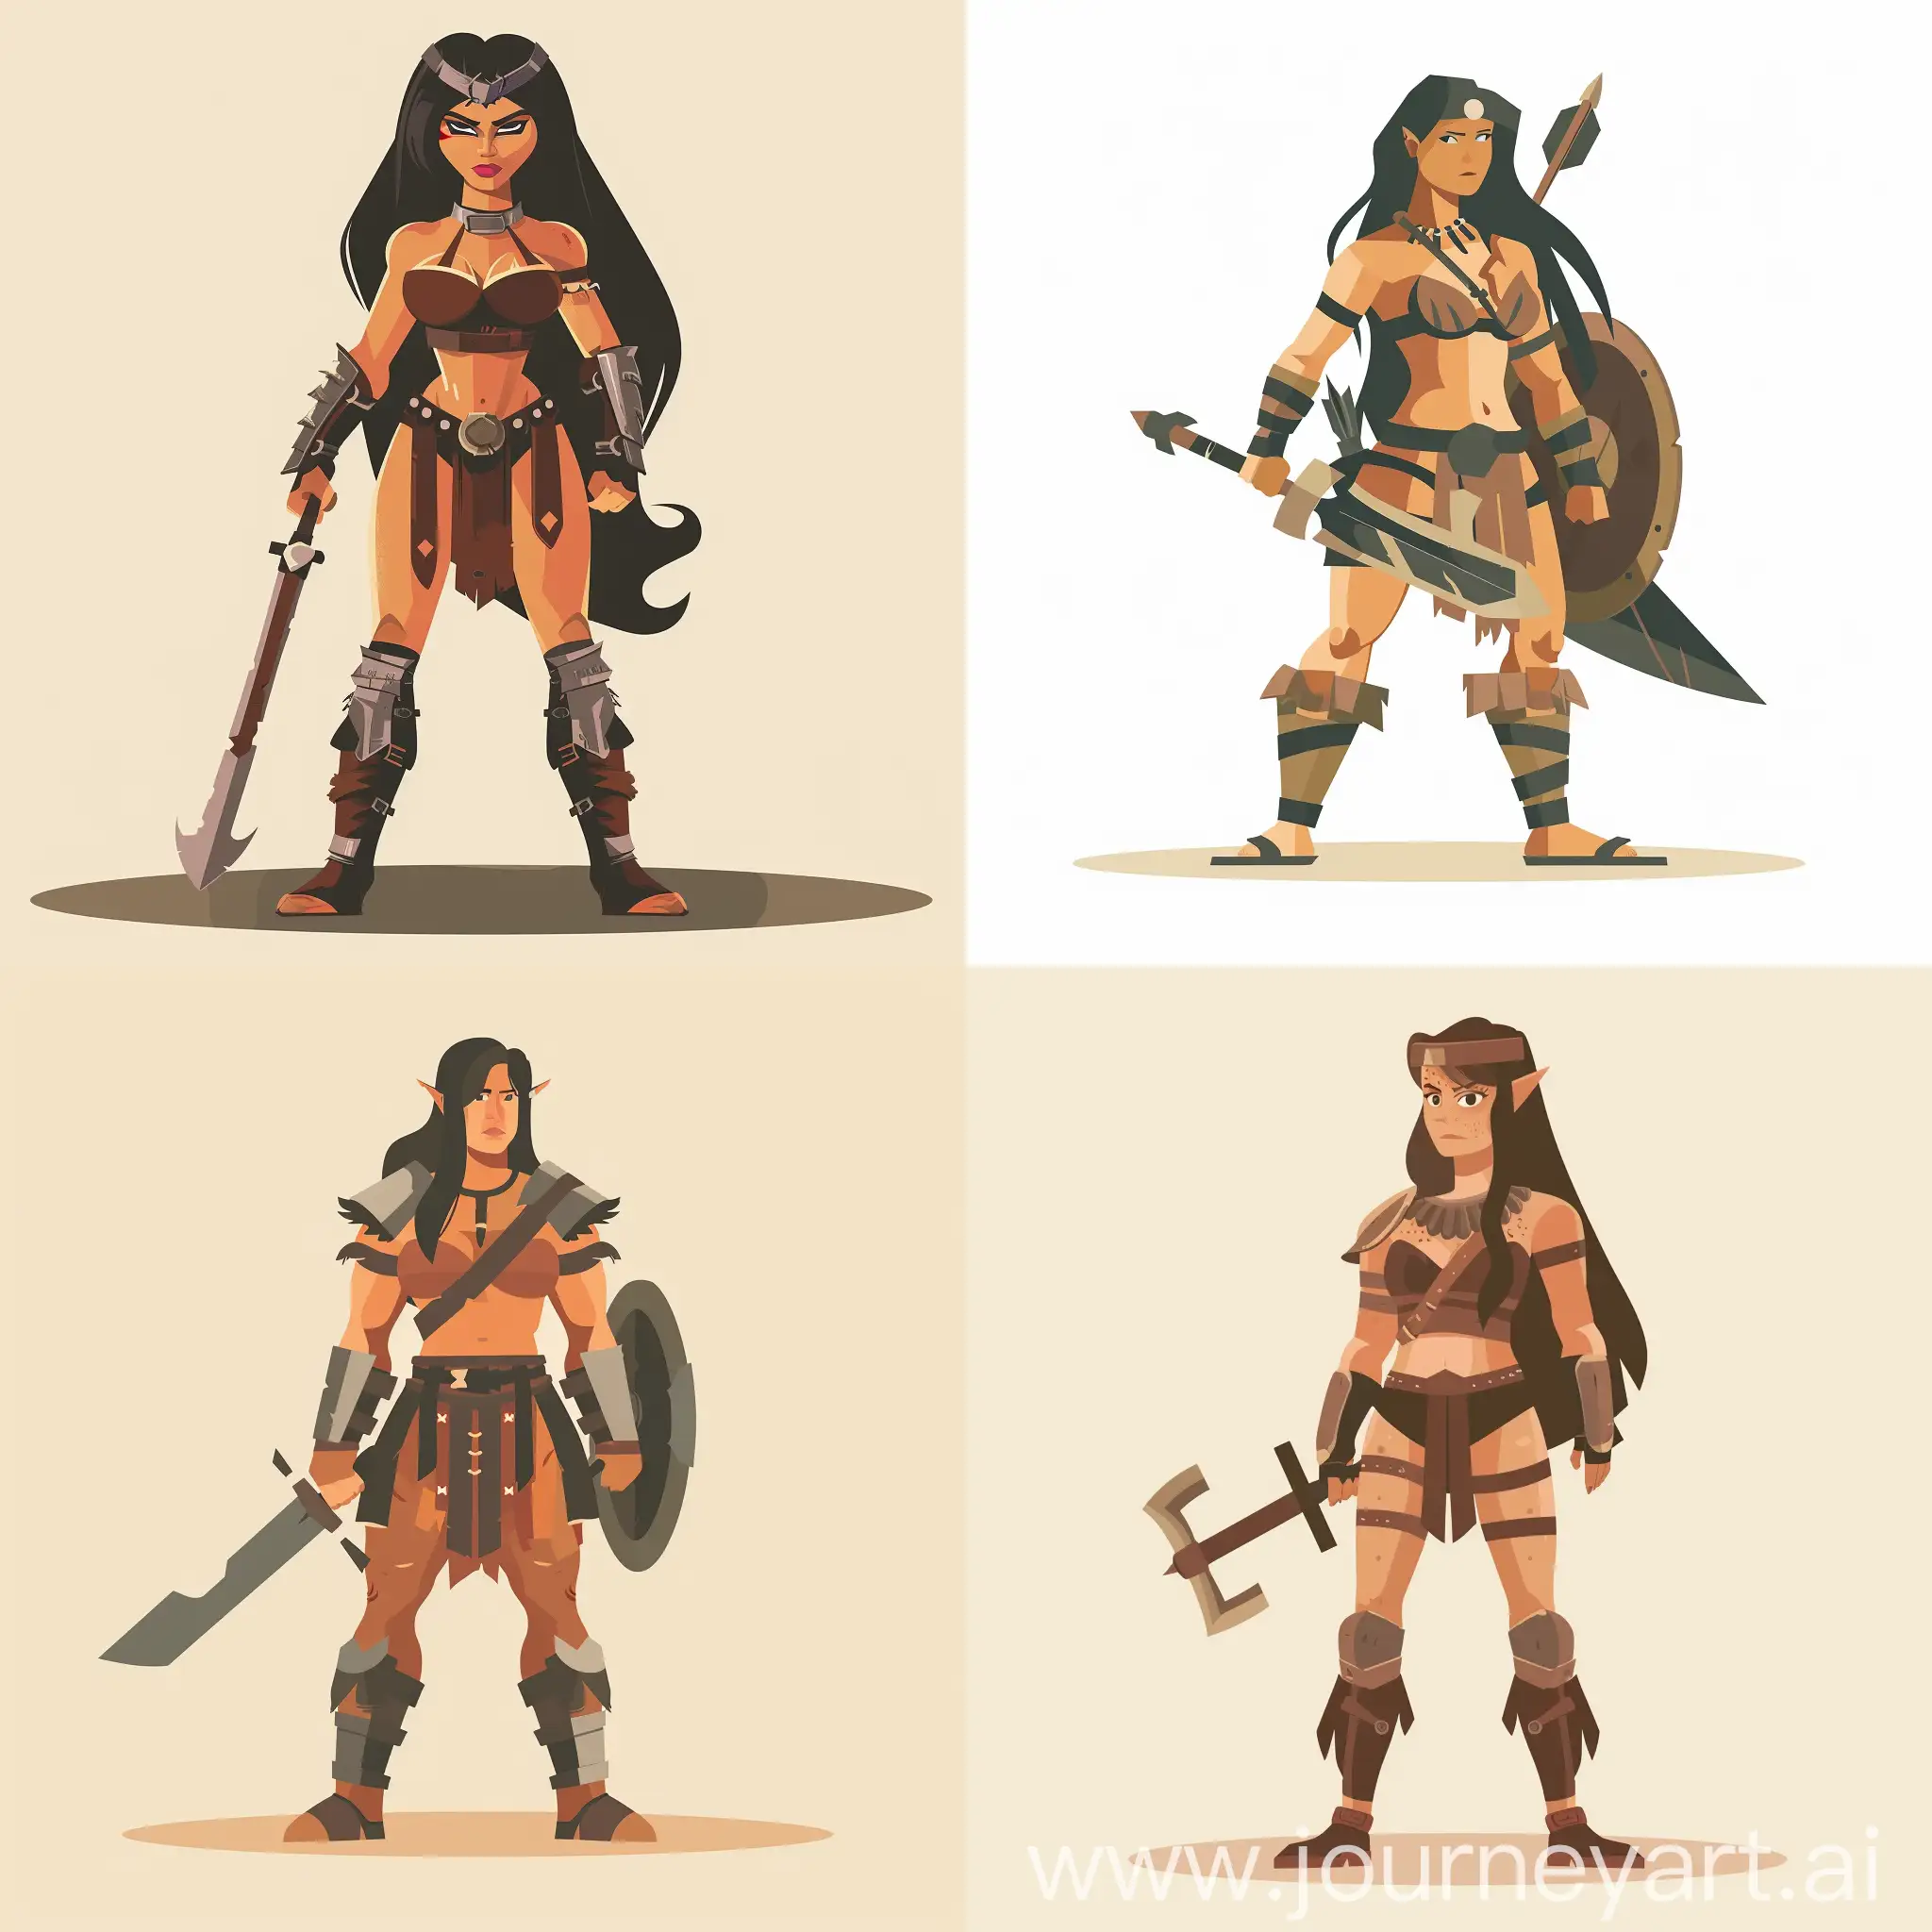 flat illustration of a full figure female barbarian warrior in the style of Conan the Barbarian